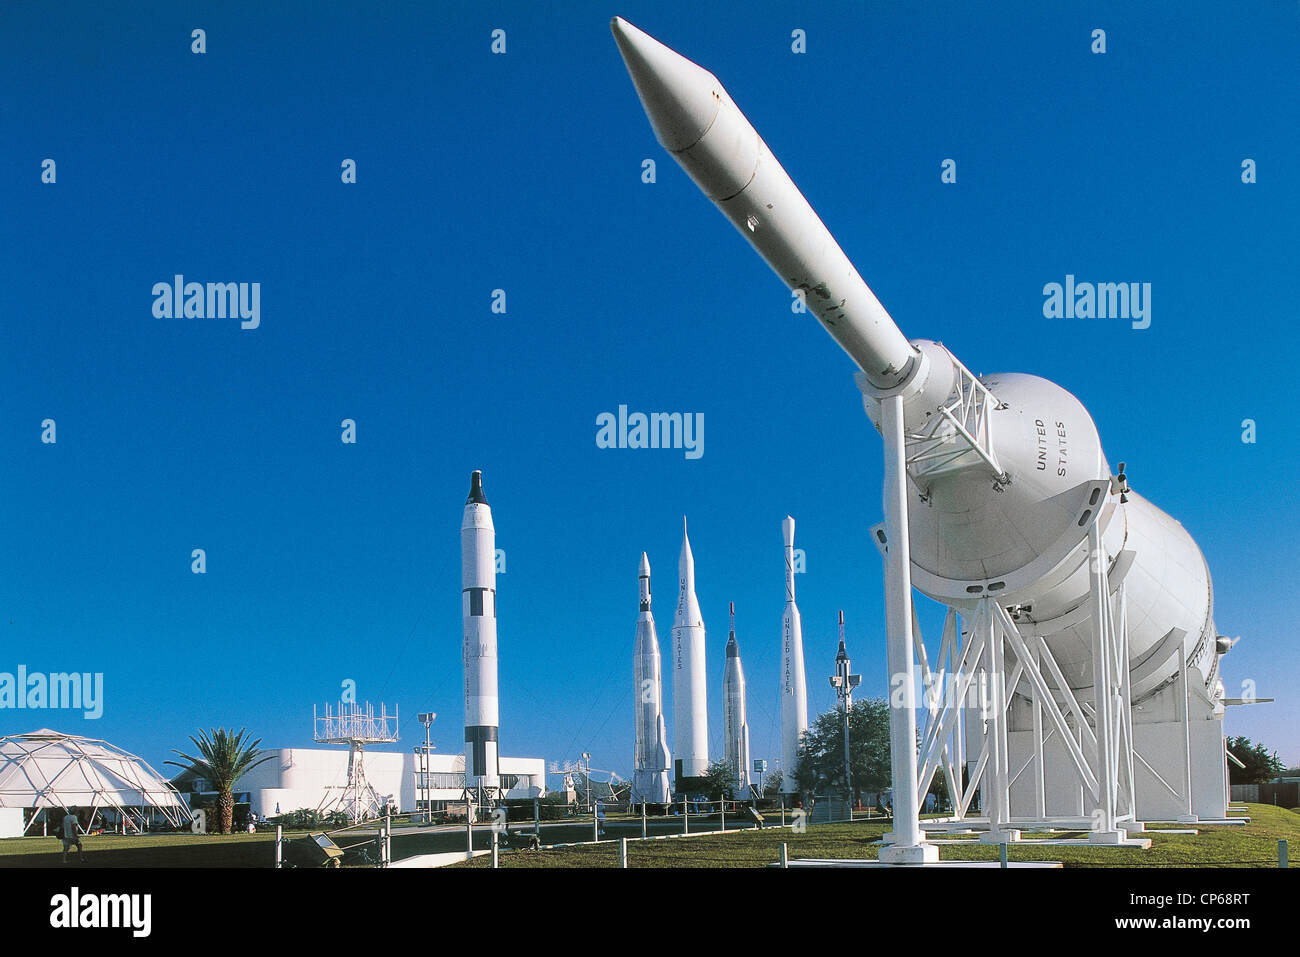 USA - Florida - Cape Canaveral, Kennedy Space Center. Stock Photo